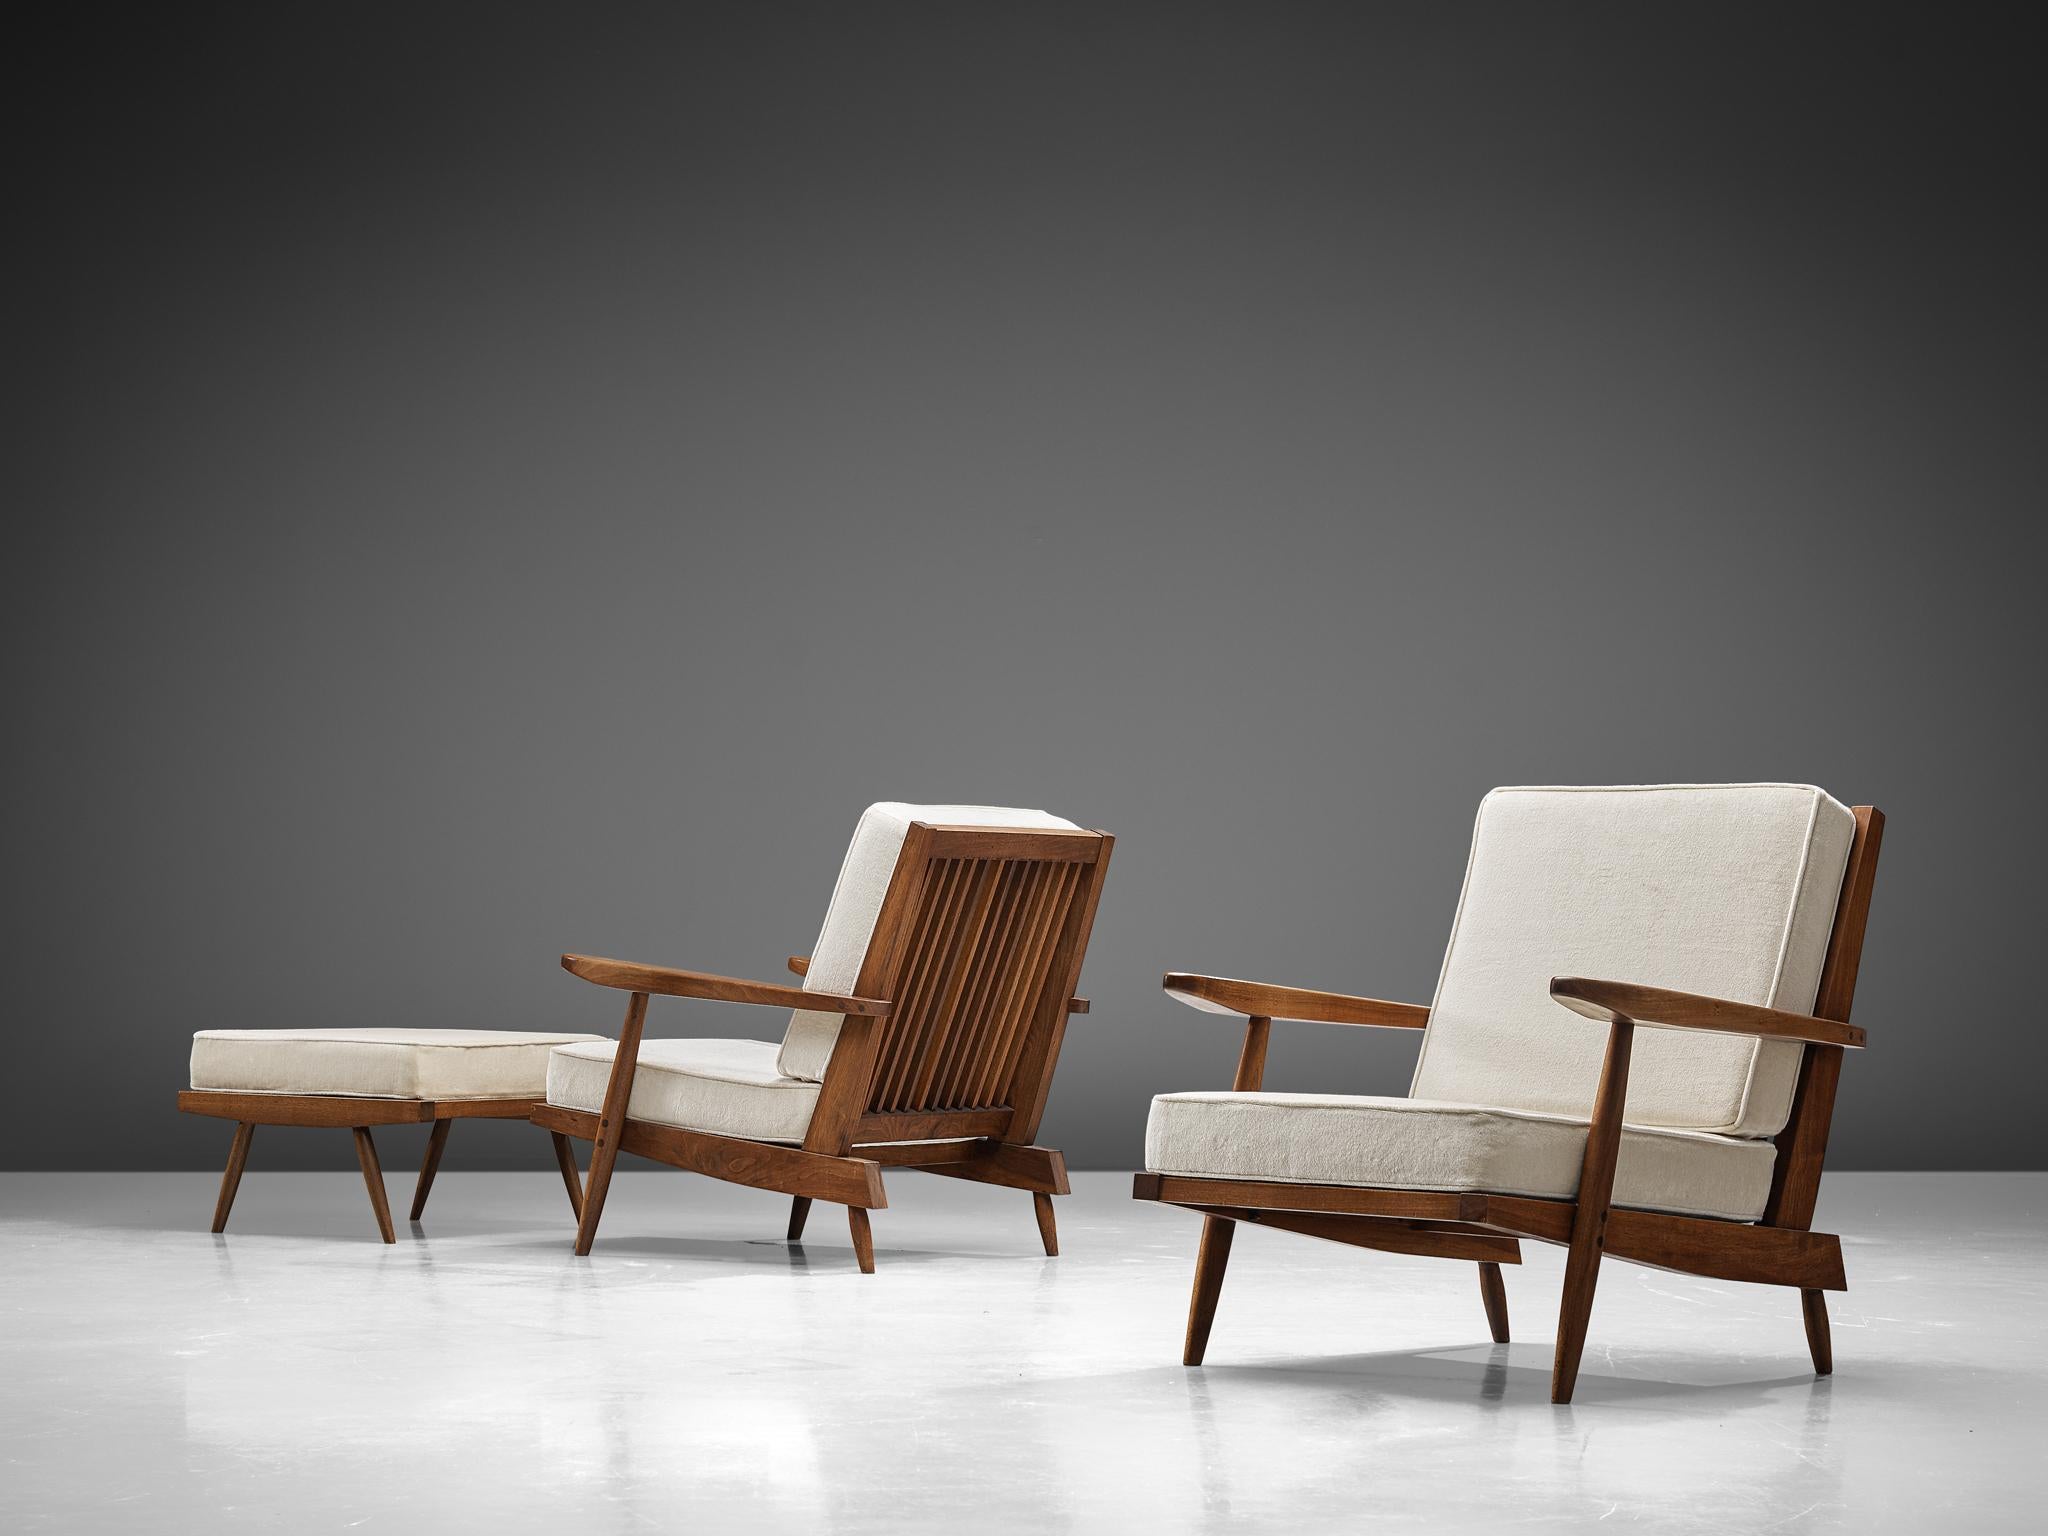 George Nakashima, armchairs, walnut, ivory fabric, United States, design, circa 1950.  

These quintessential spindleback armchairs and ottomans are designed by Nakashima. The chairs feature spindles at the back, referring with this detail to the